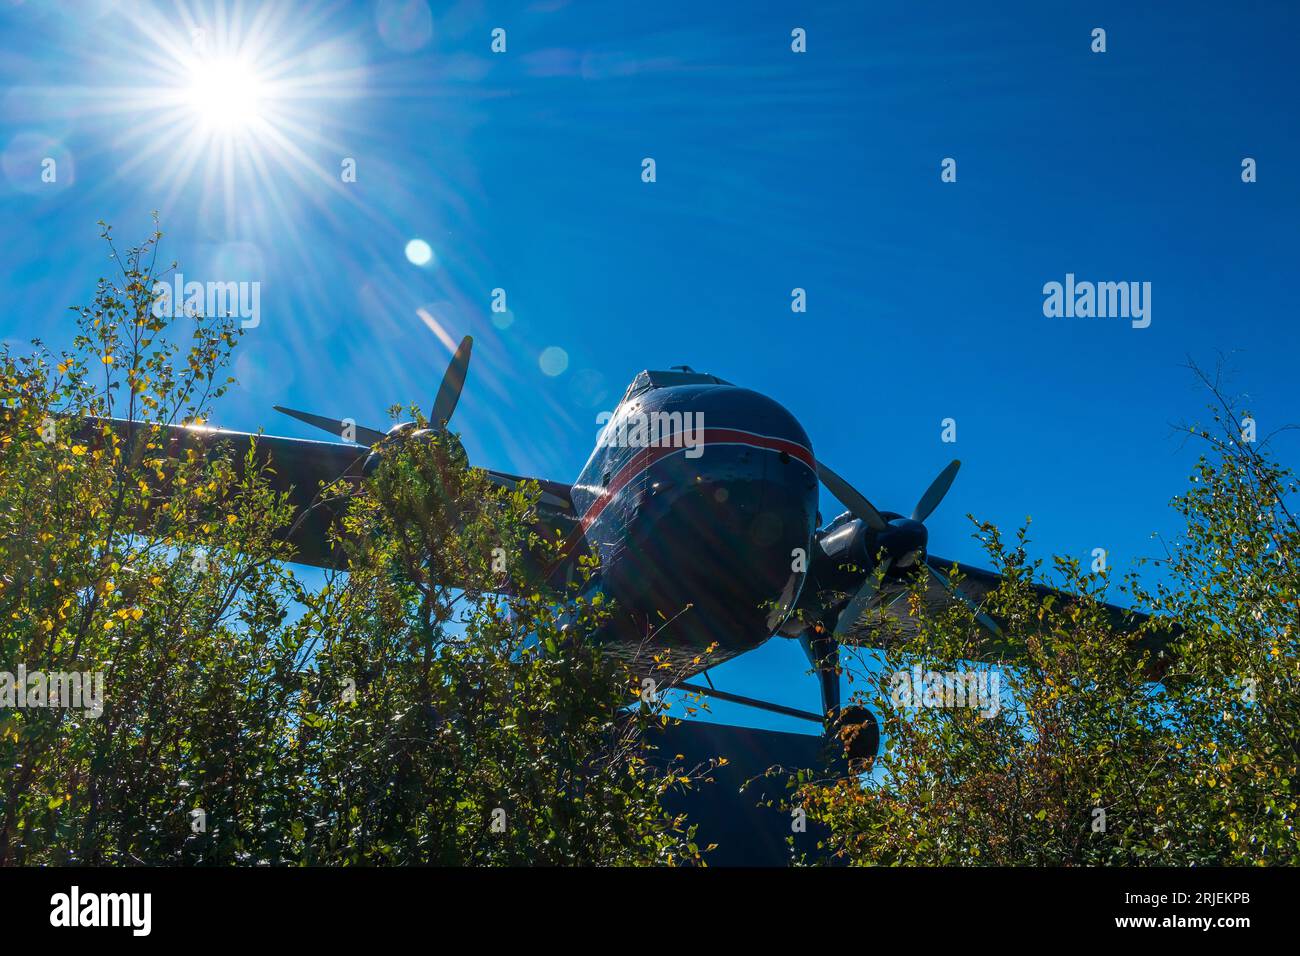 Yellowknife, NT  Canada - 13 AUG 2022: A Bristol Air Freighter suspended in the sky welcomes visitors to Yellowknife, Northwest Territories, Canada Stock Photo